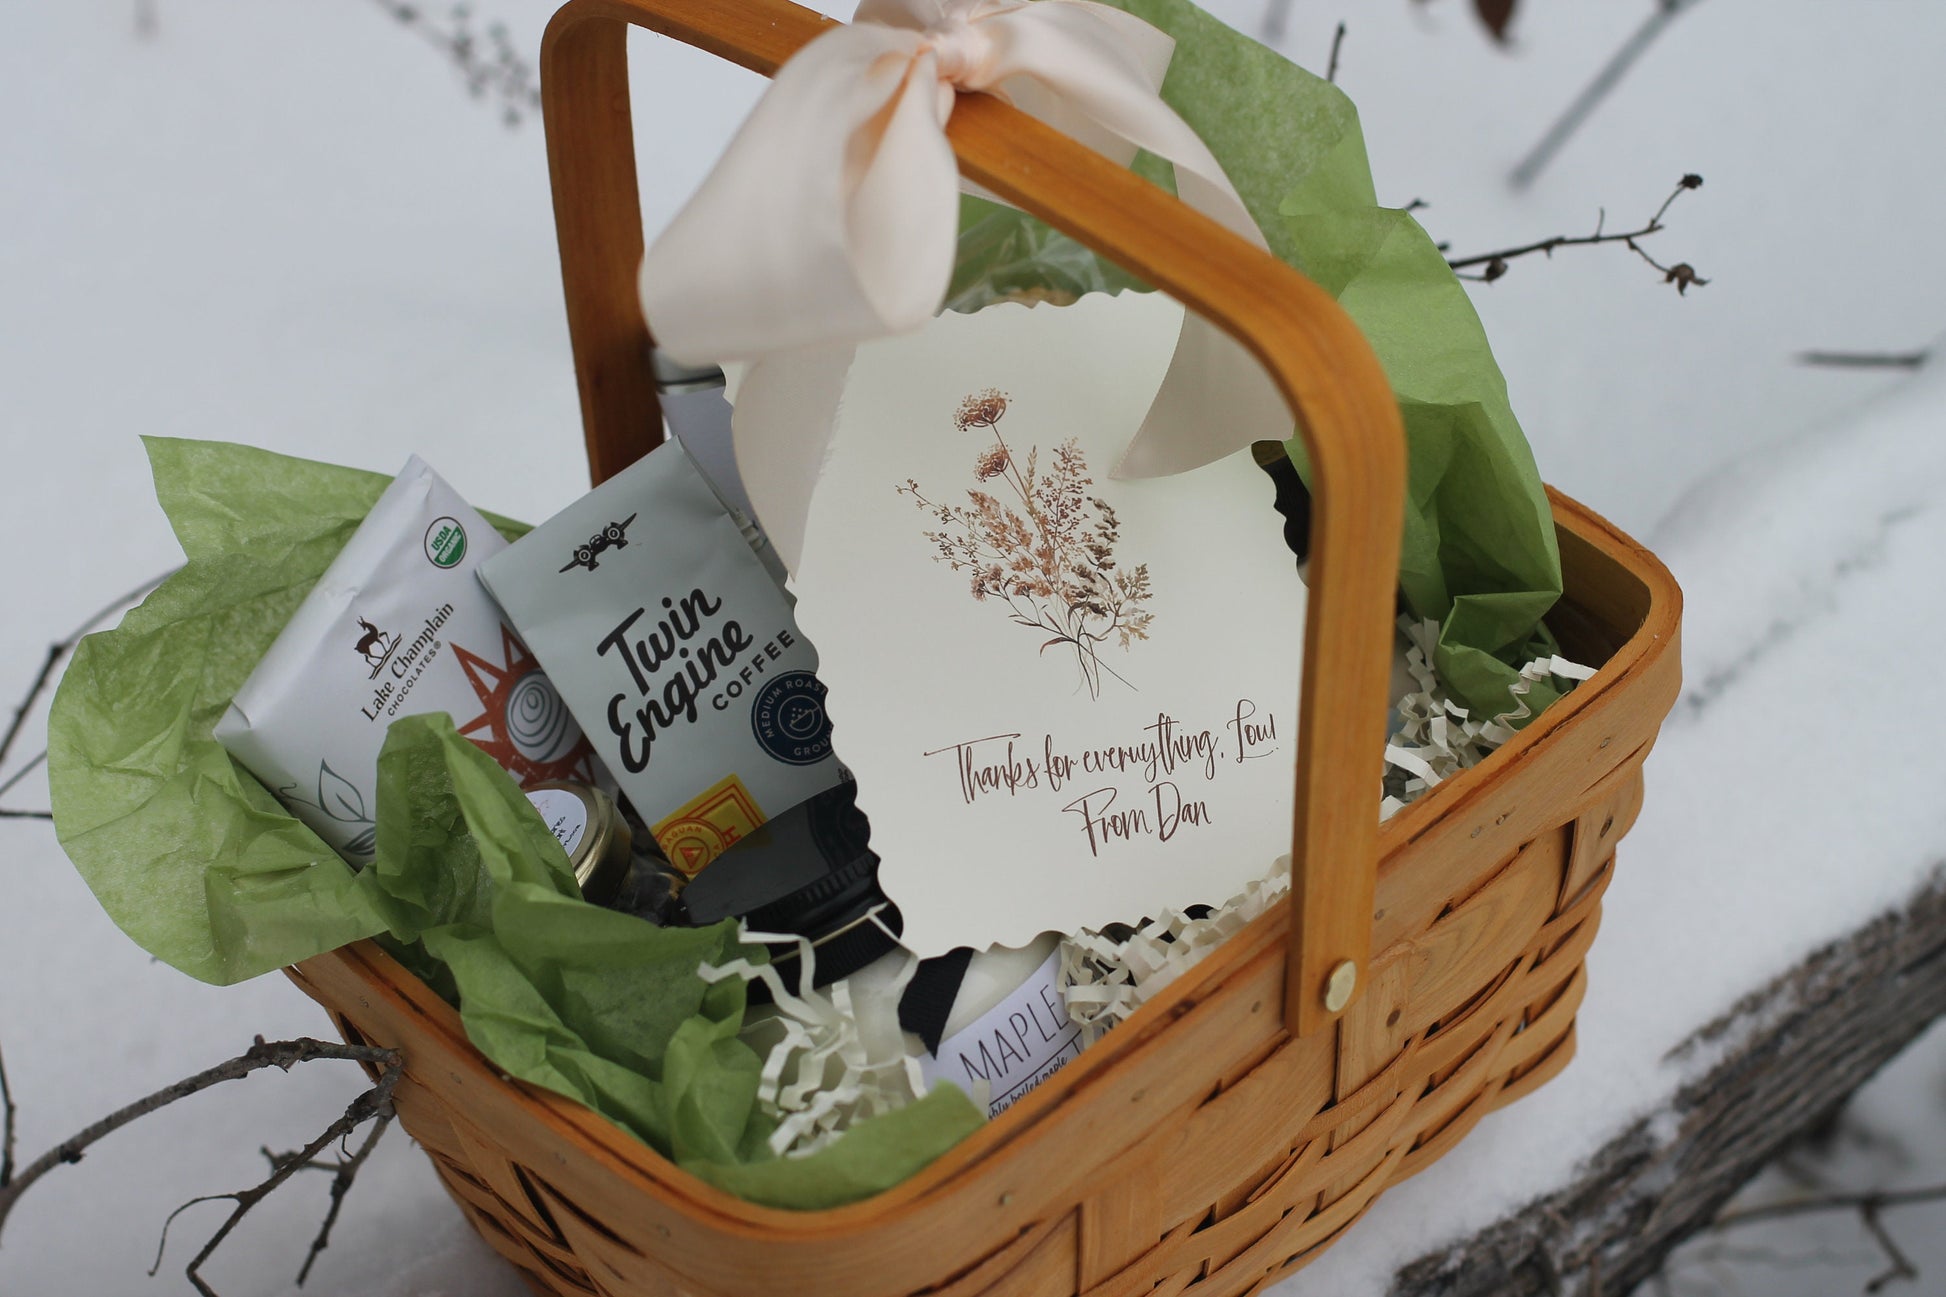 Vermont Care Package Gift Basket - Vermont Gourmet-Vermont Artisan - Vermont Gift -Vermont Maple Gift-Best of Vermont-Love from Vermont